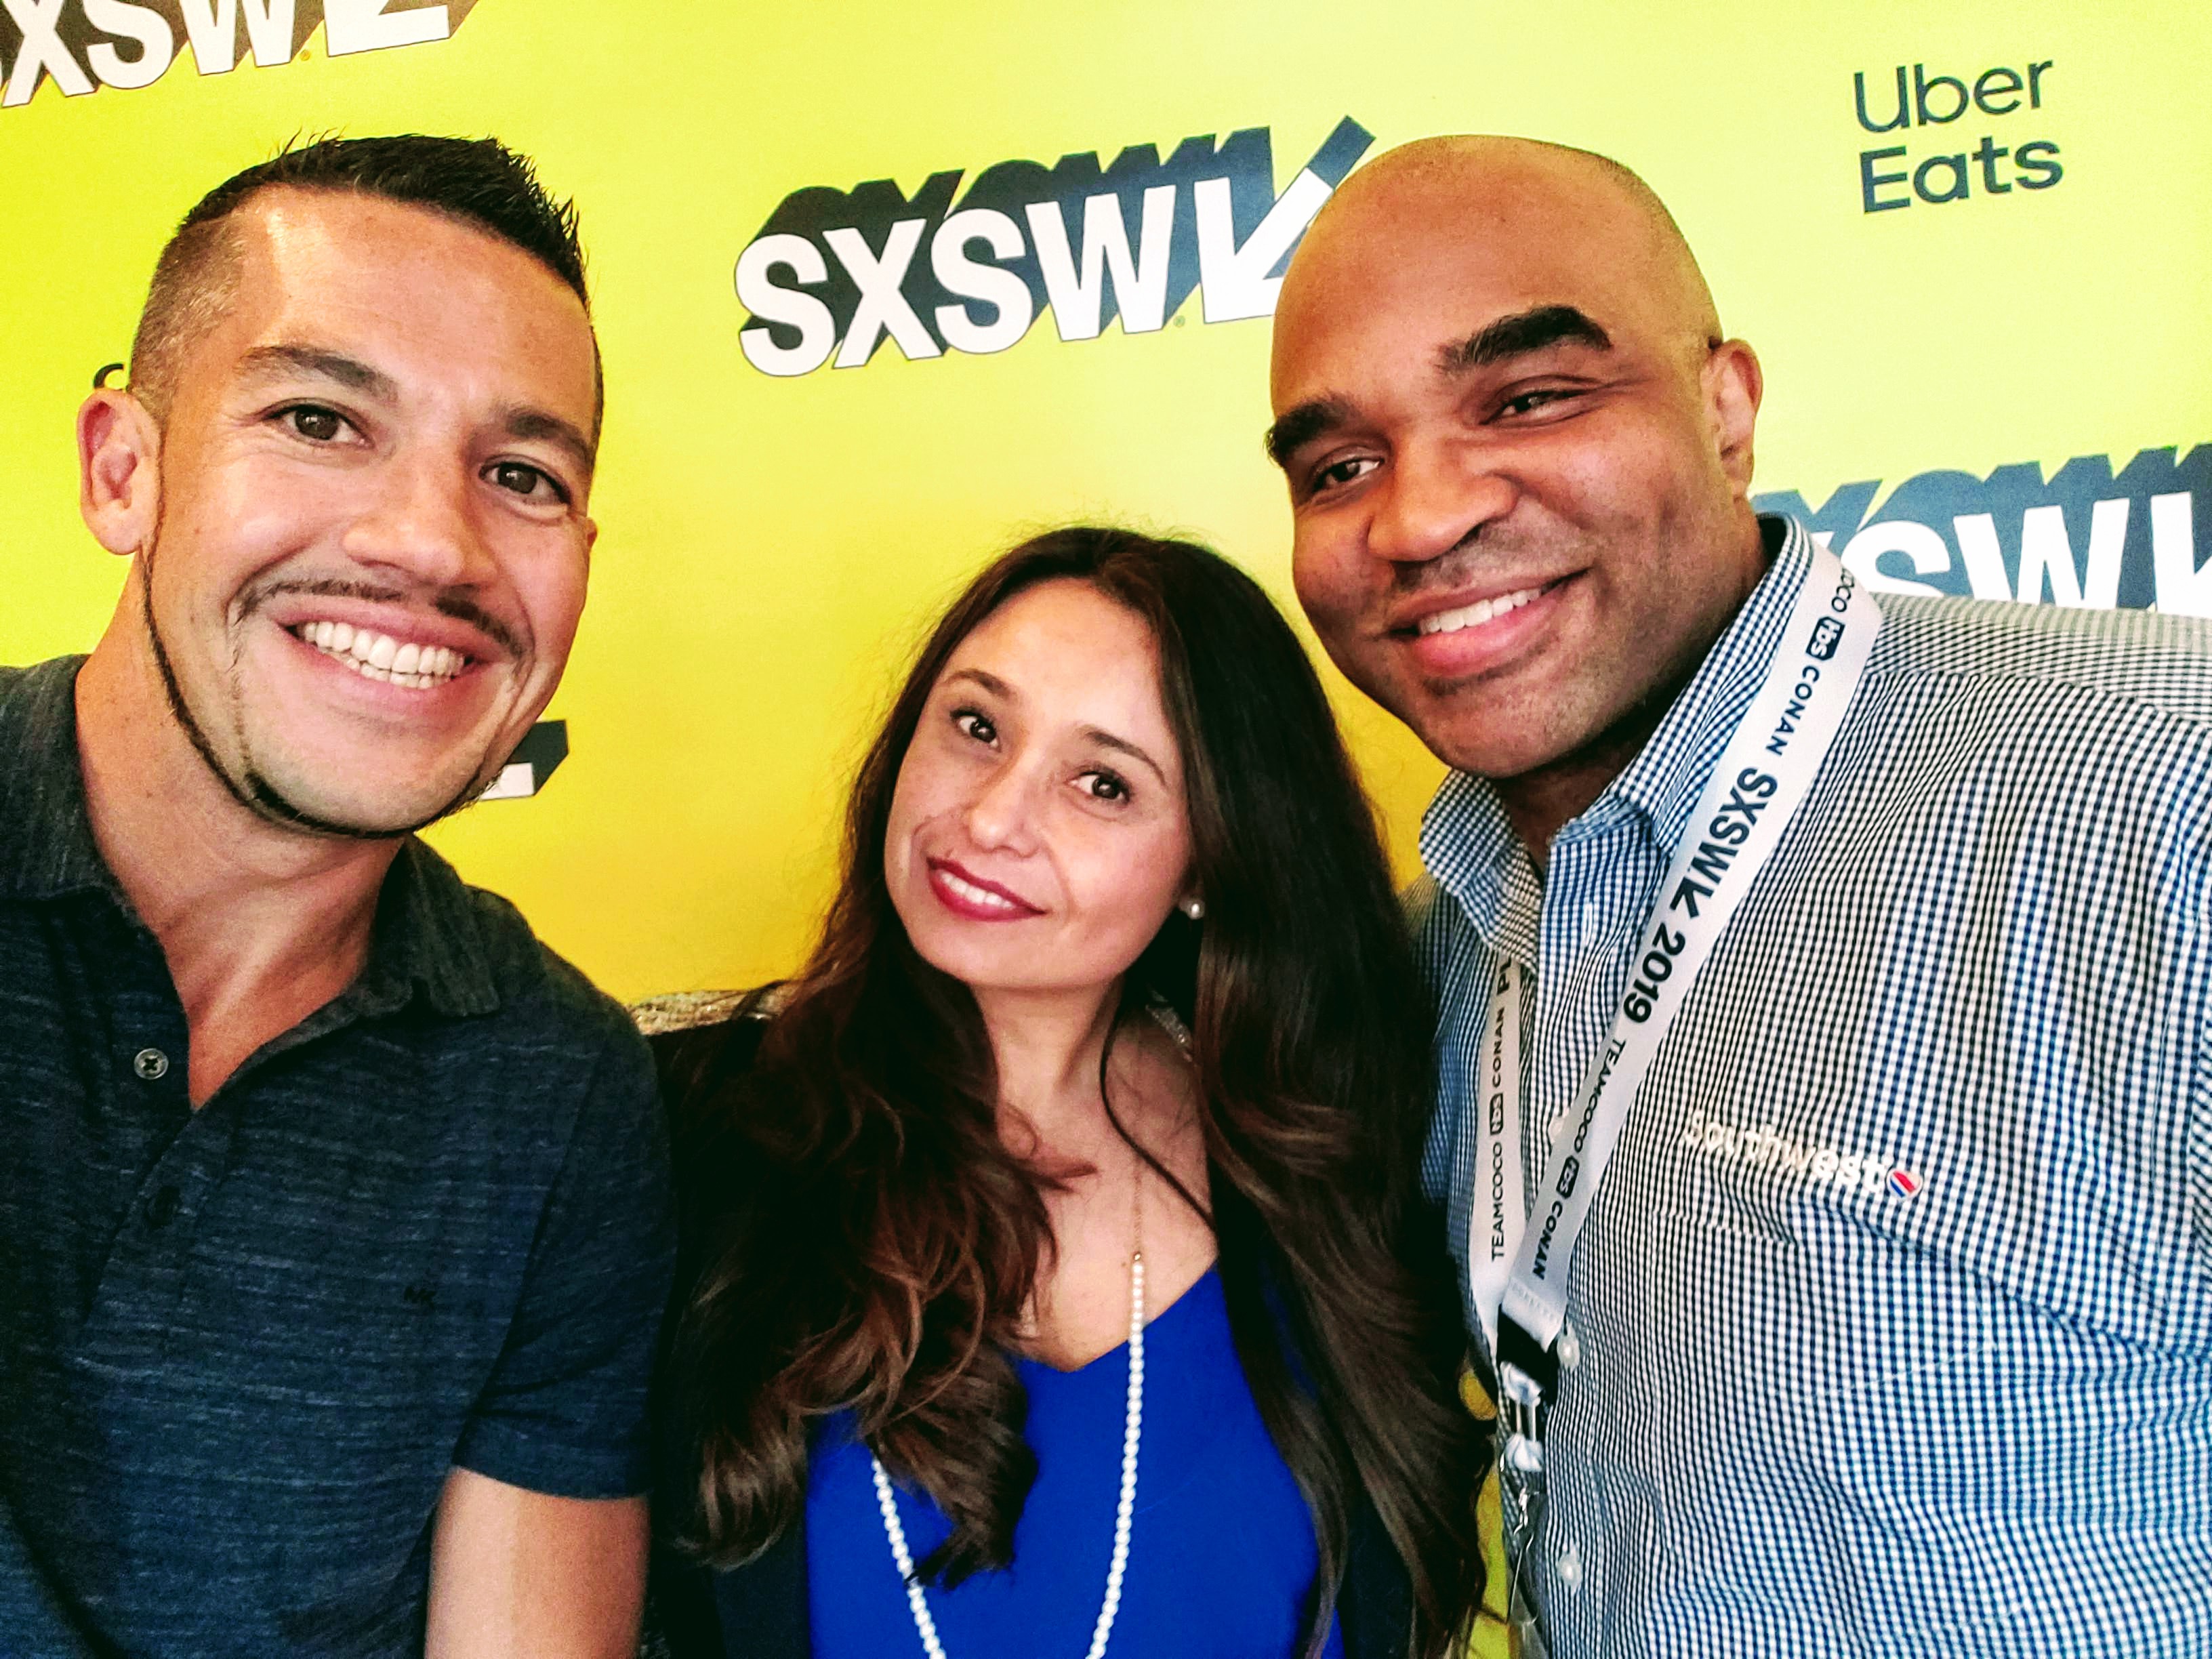 Highlights from SXSW 2019 Co-Founders Top 5